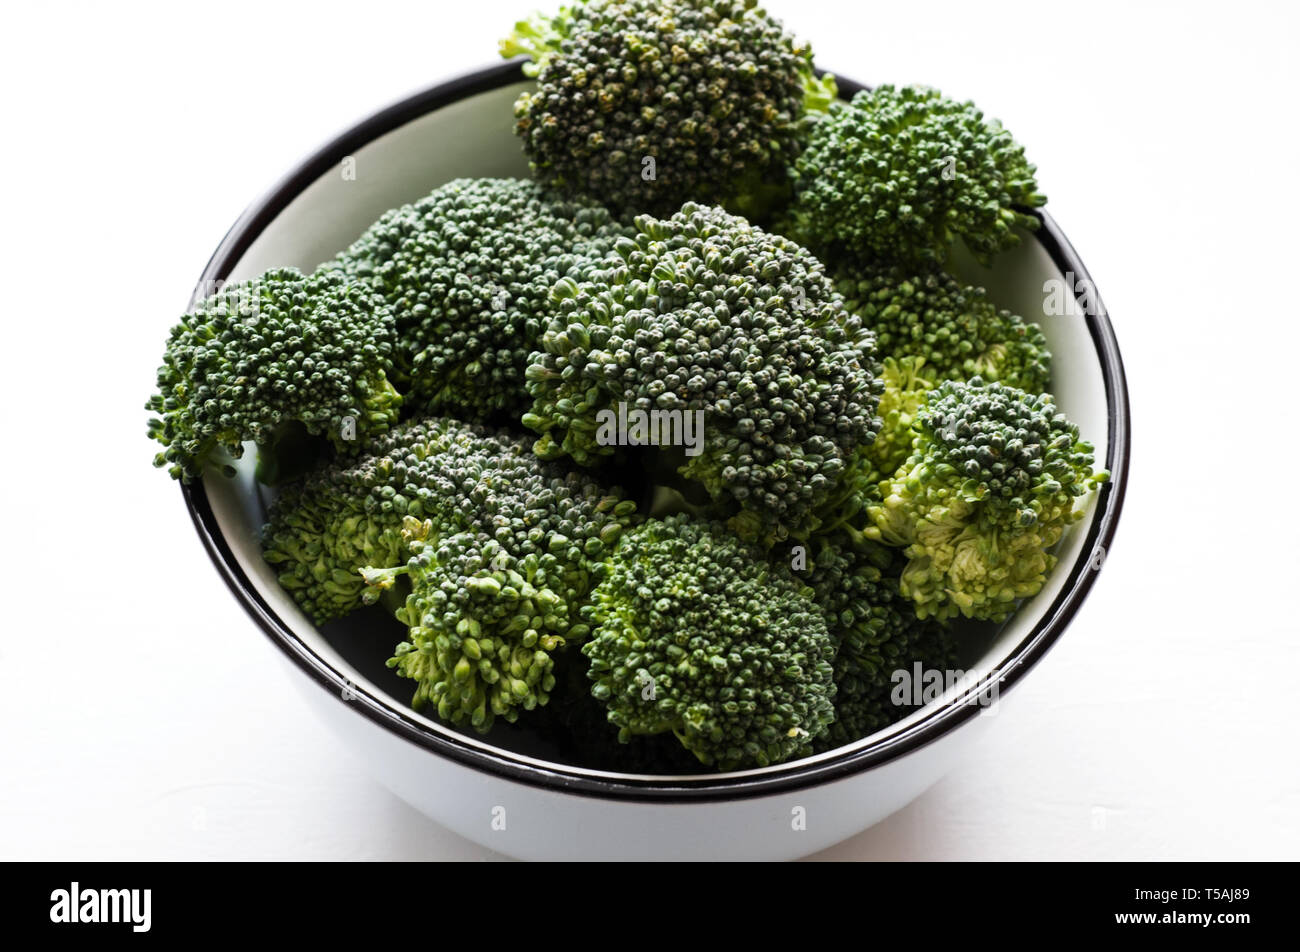 Image of organic  broccoli florets in the  ceramic bowl.Healthy eating concept. Stock Photo